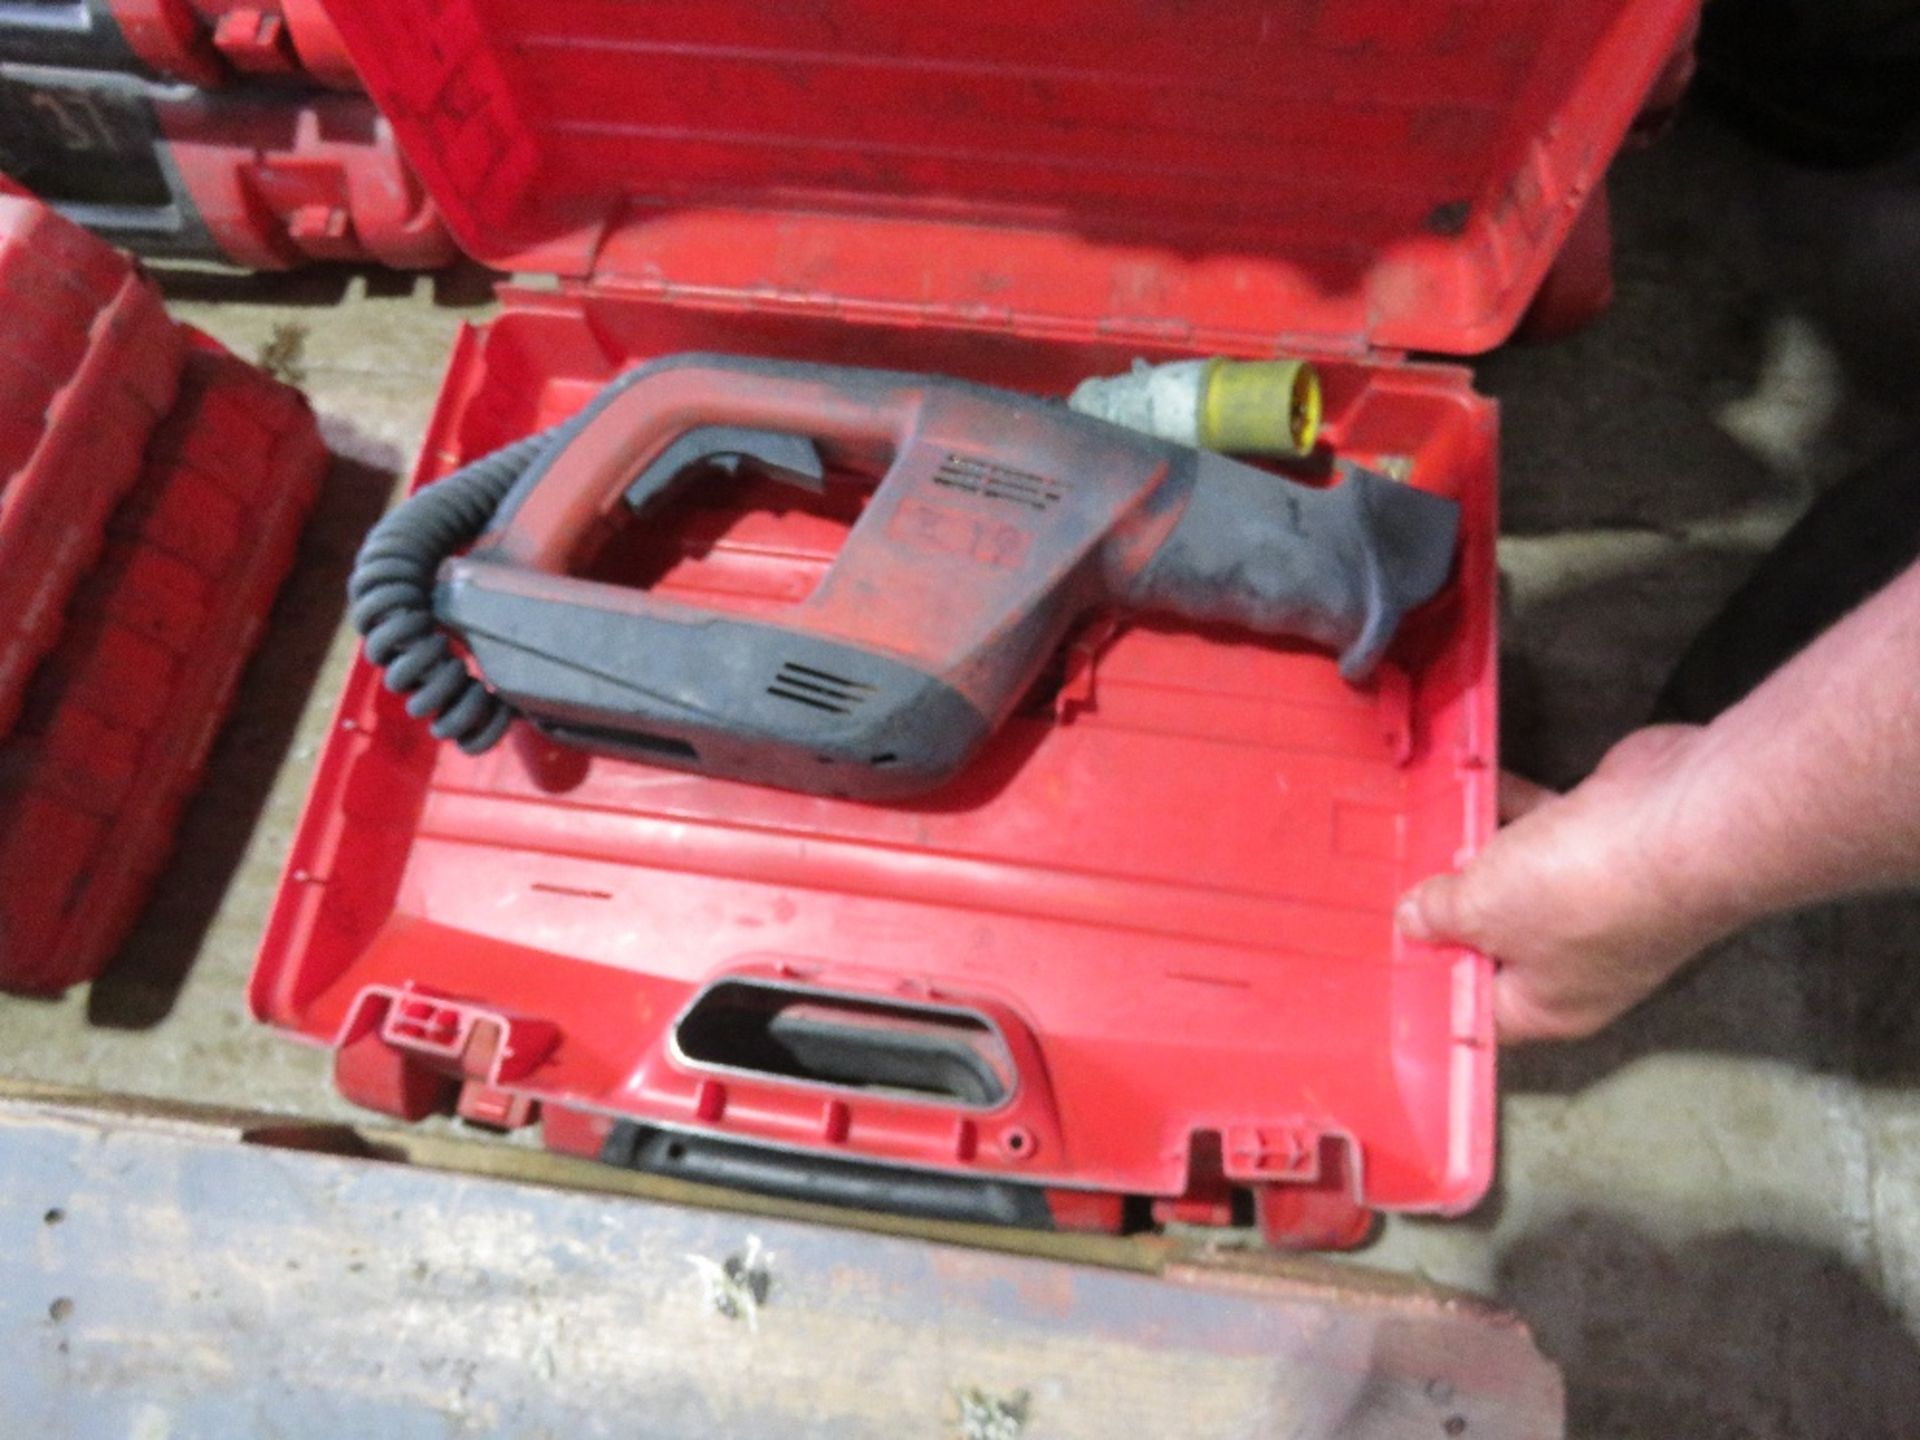 4 X HILTI 110VOLT POWERED RECIPROCATING SAWS (ONE IS INCOMPLETE). - Image 3 of 4